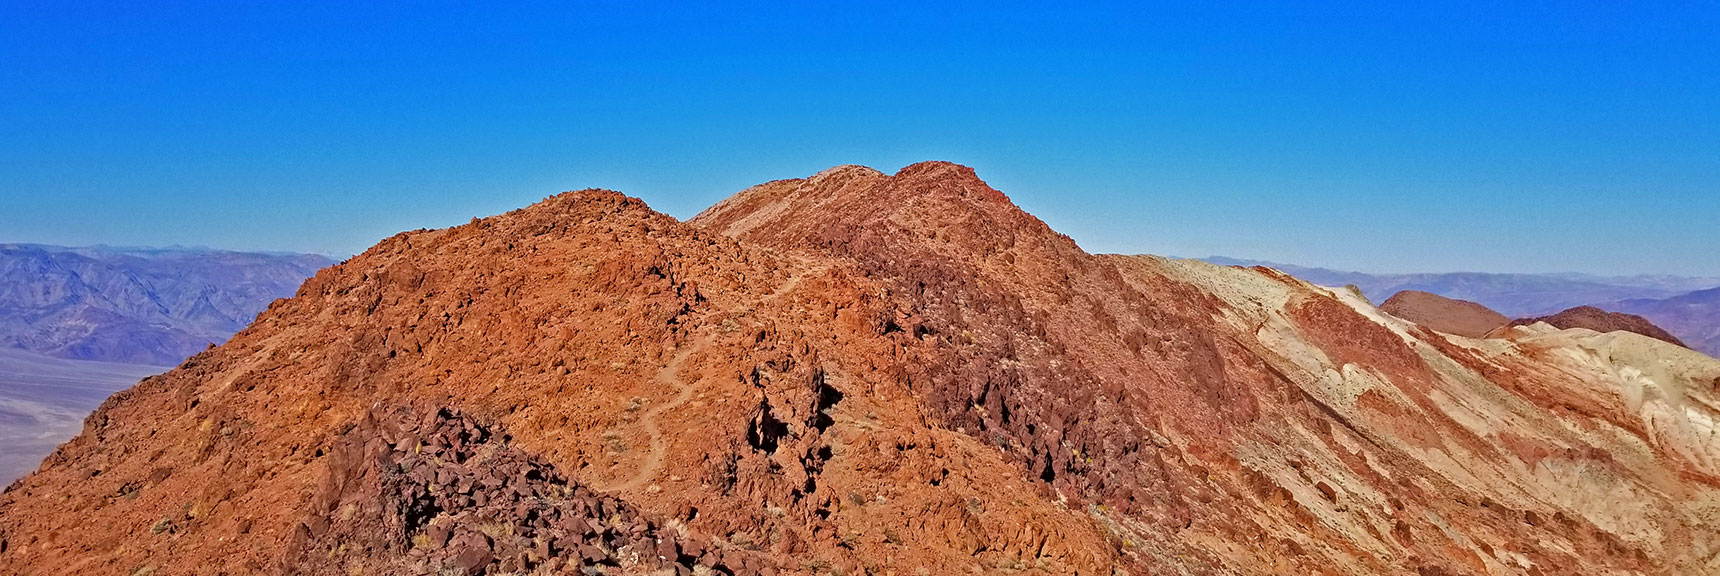 Navigating Mt. Perry's High Red Rock Summit Ridge | Dante's View to Mt. Perry | Death Valley National Park, CA